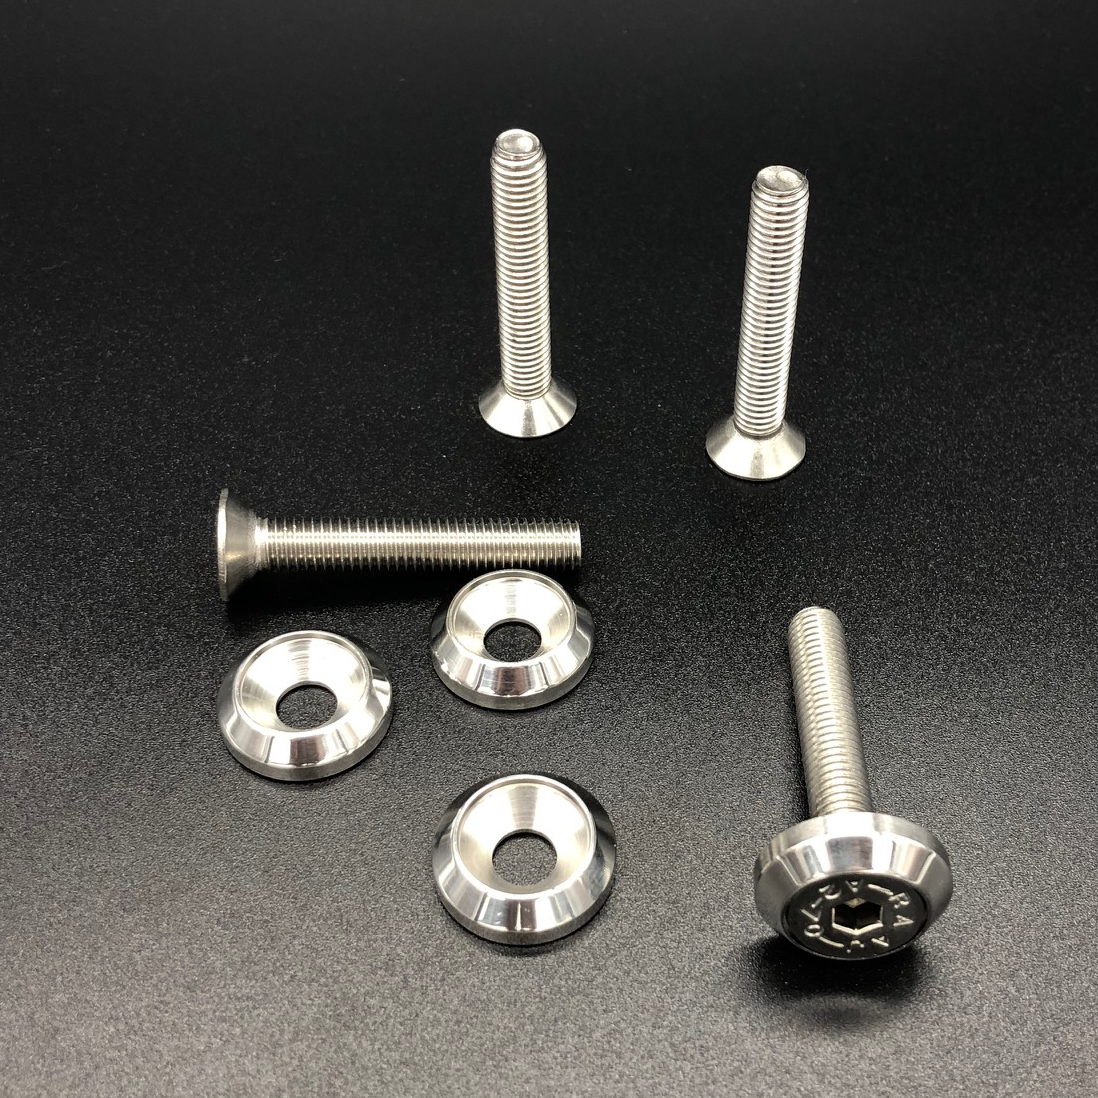 Stainless Bolt Kit for 79 to 93 Foxbody